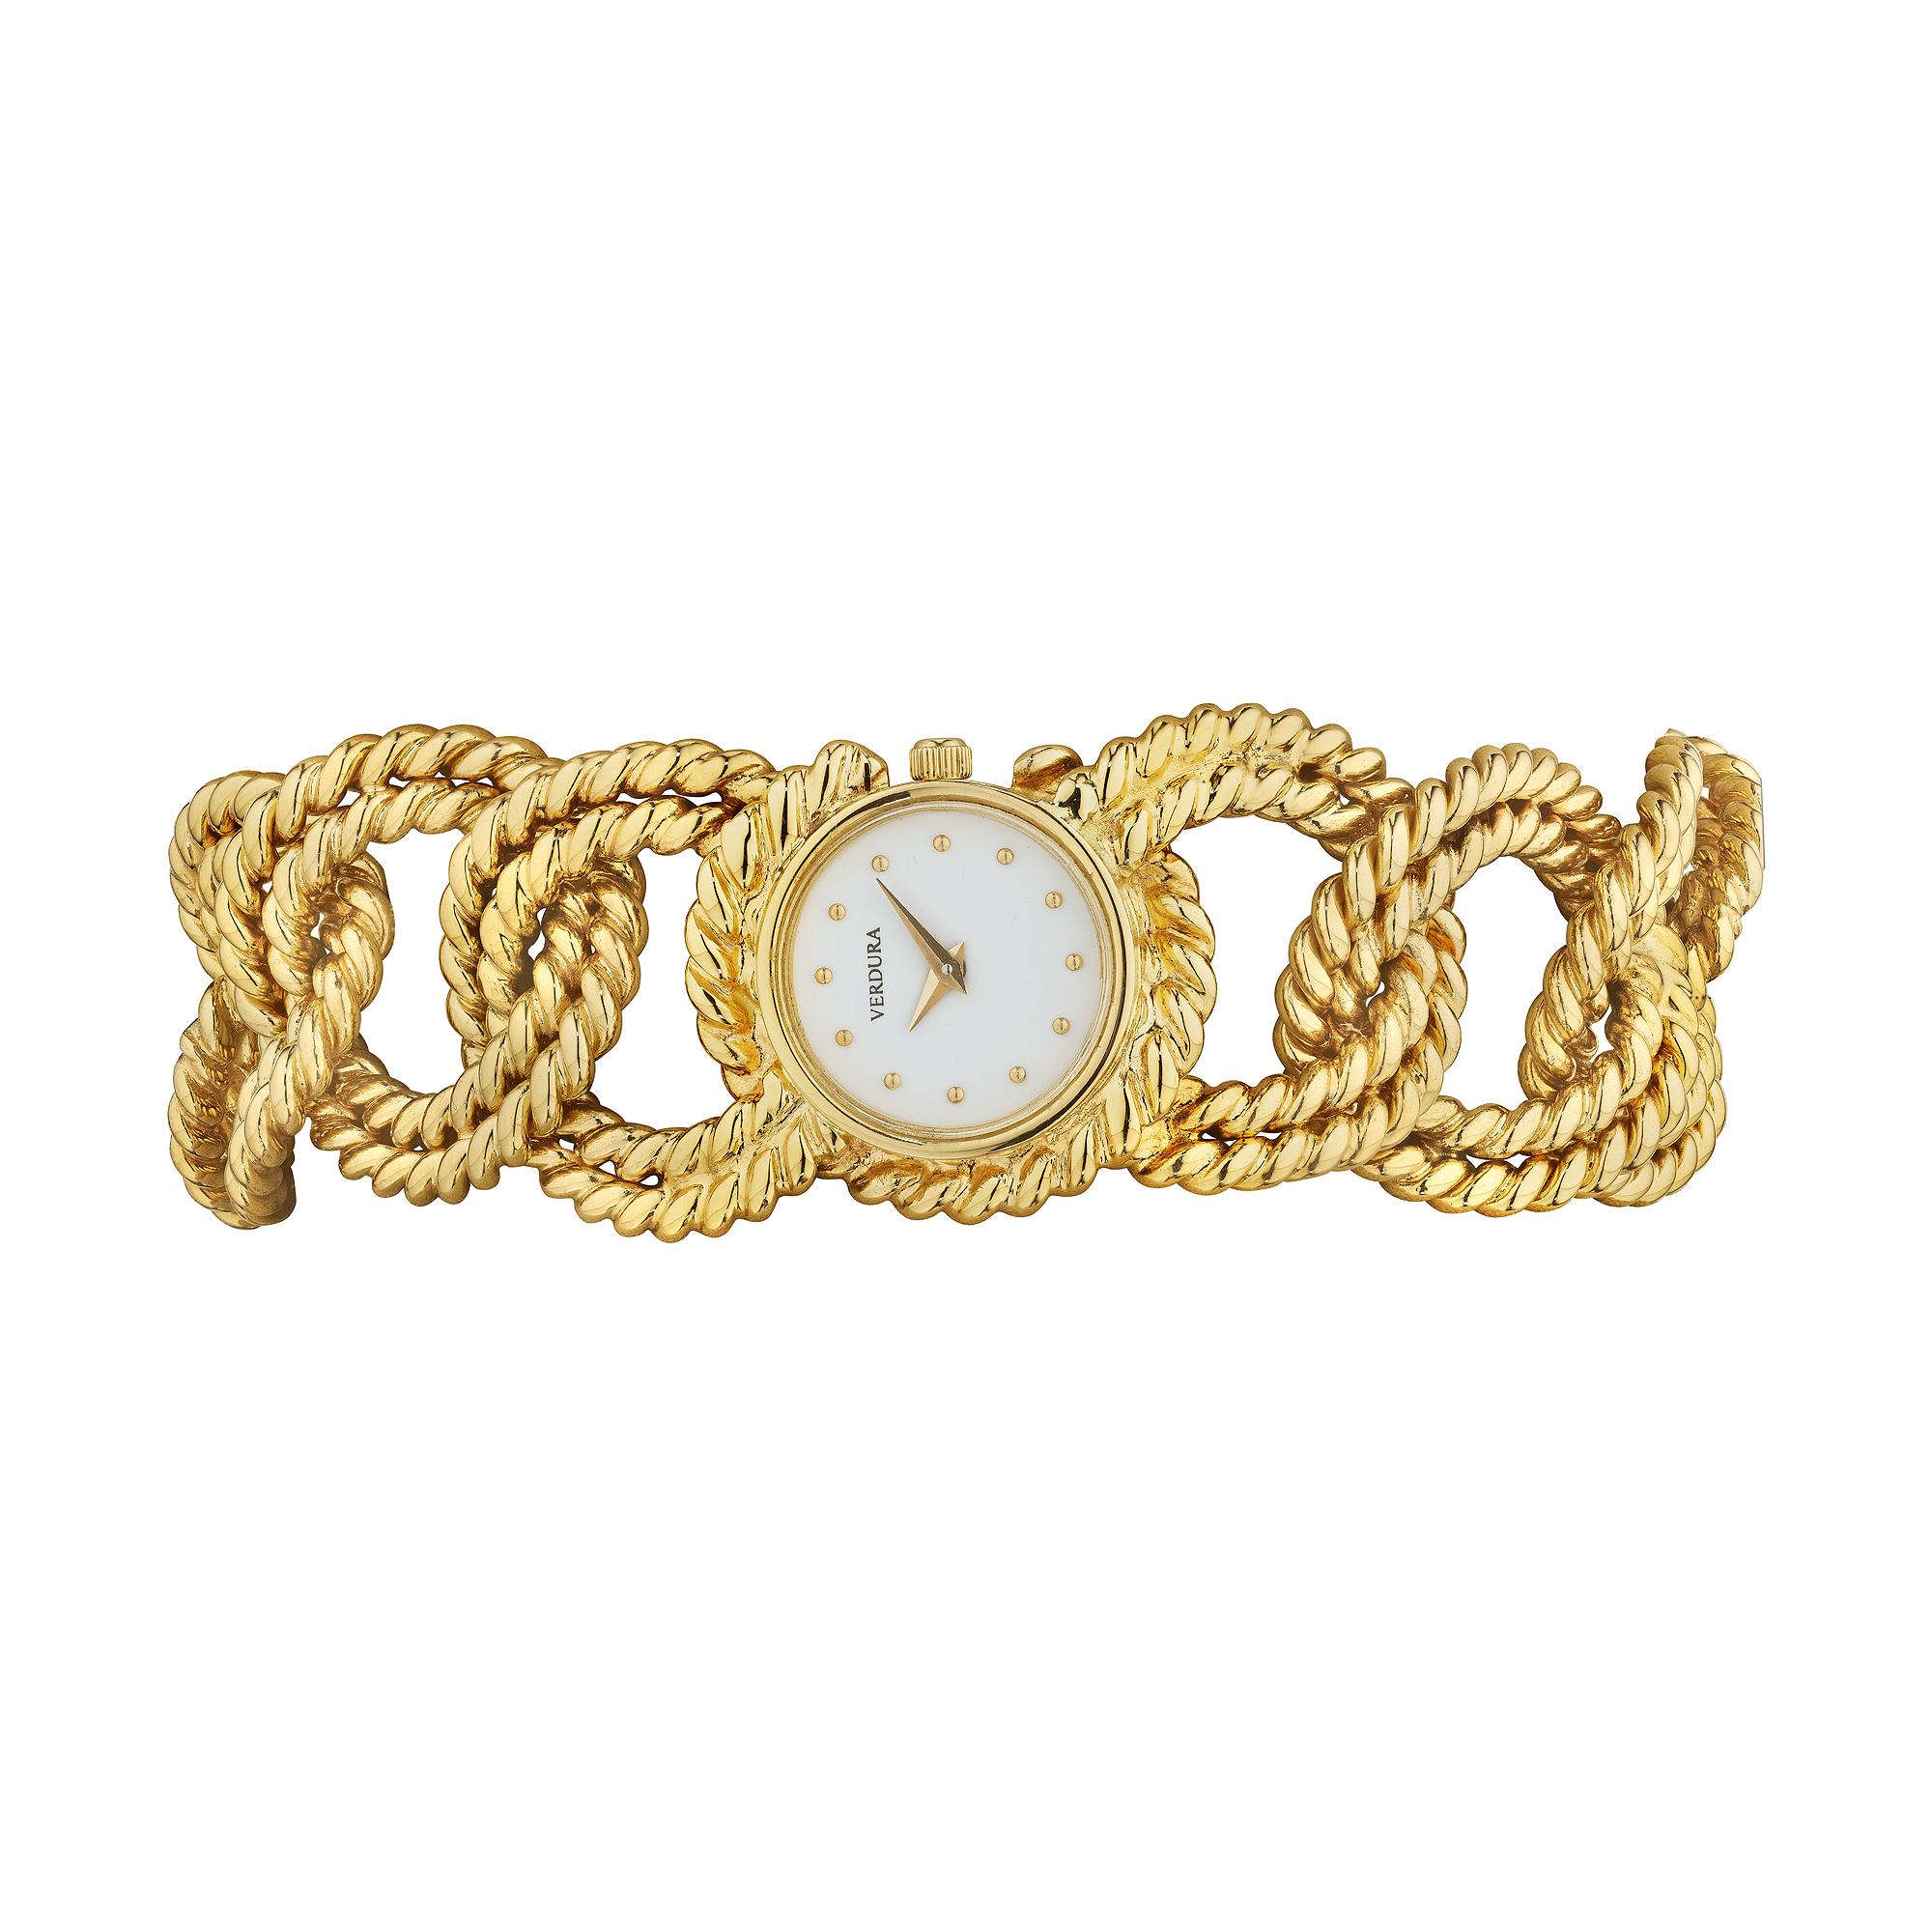 Tie everything up with this stylish Verdura 18 karat yellow gold rope link vintage watch bracelet.  Circa 2007-10.  Signed Verdura on watch dial.  7 1/2